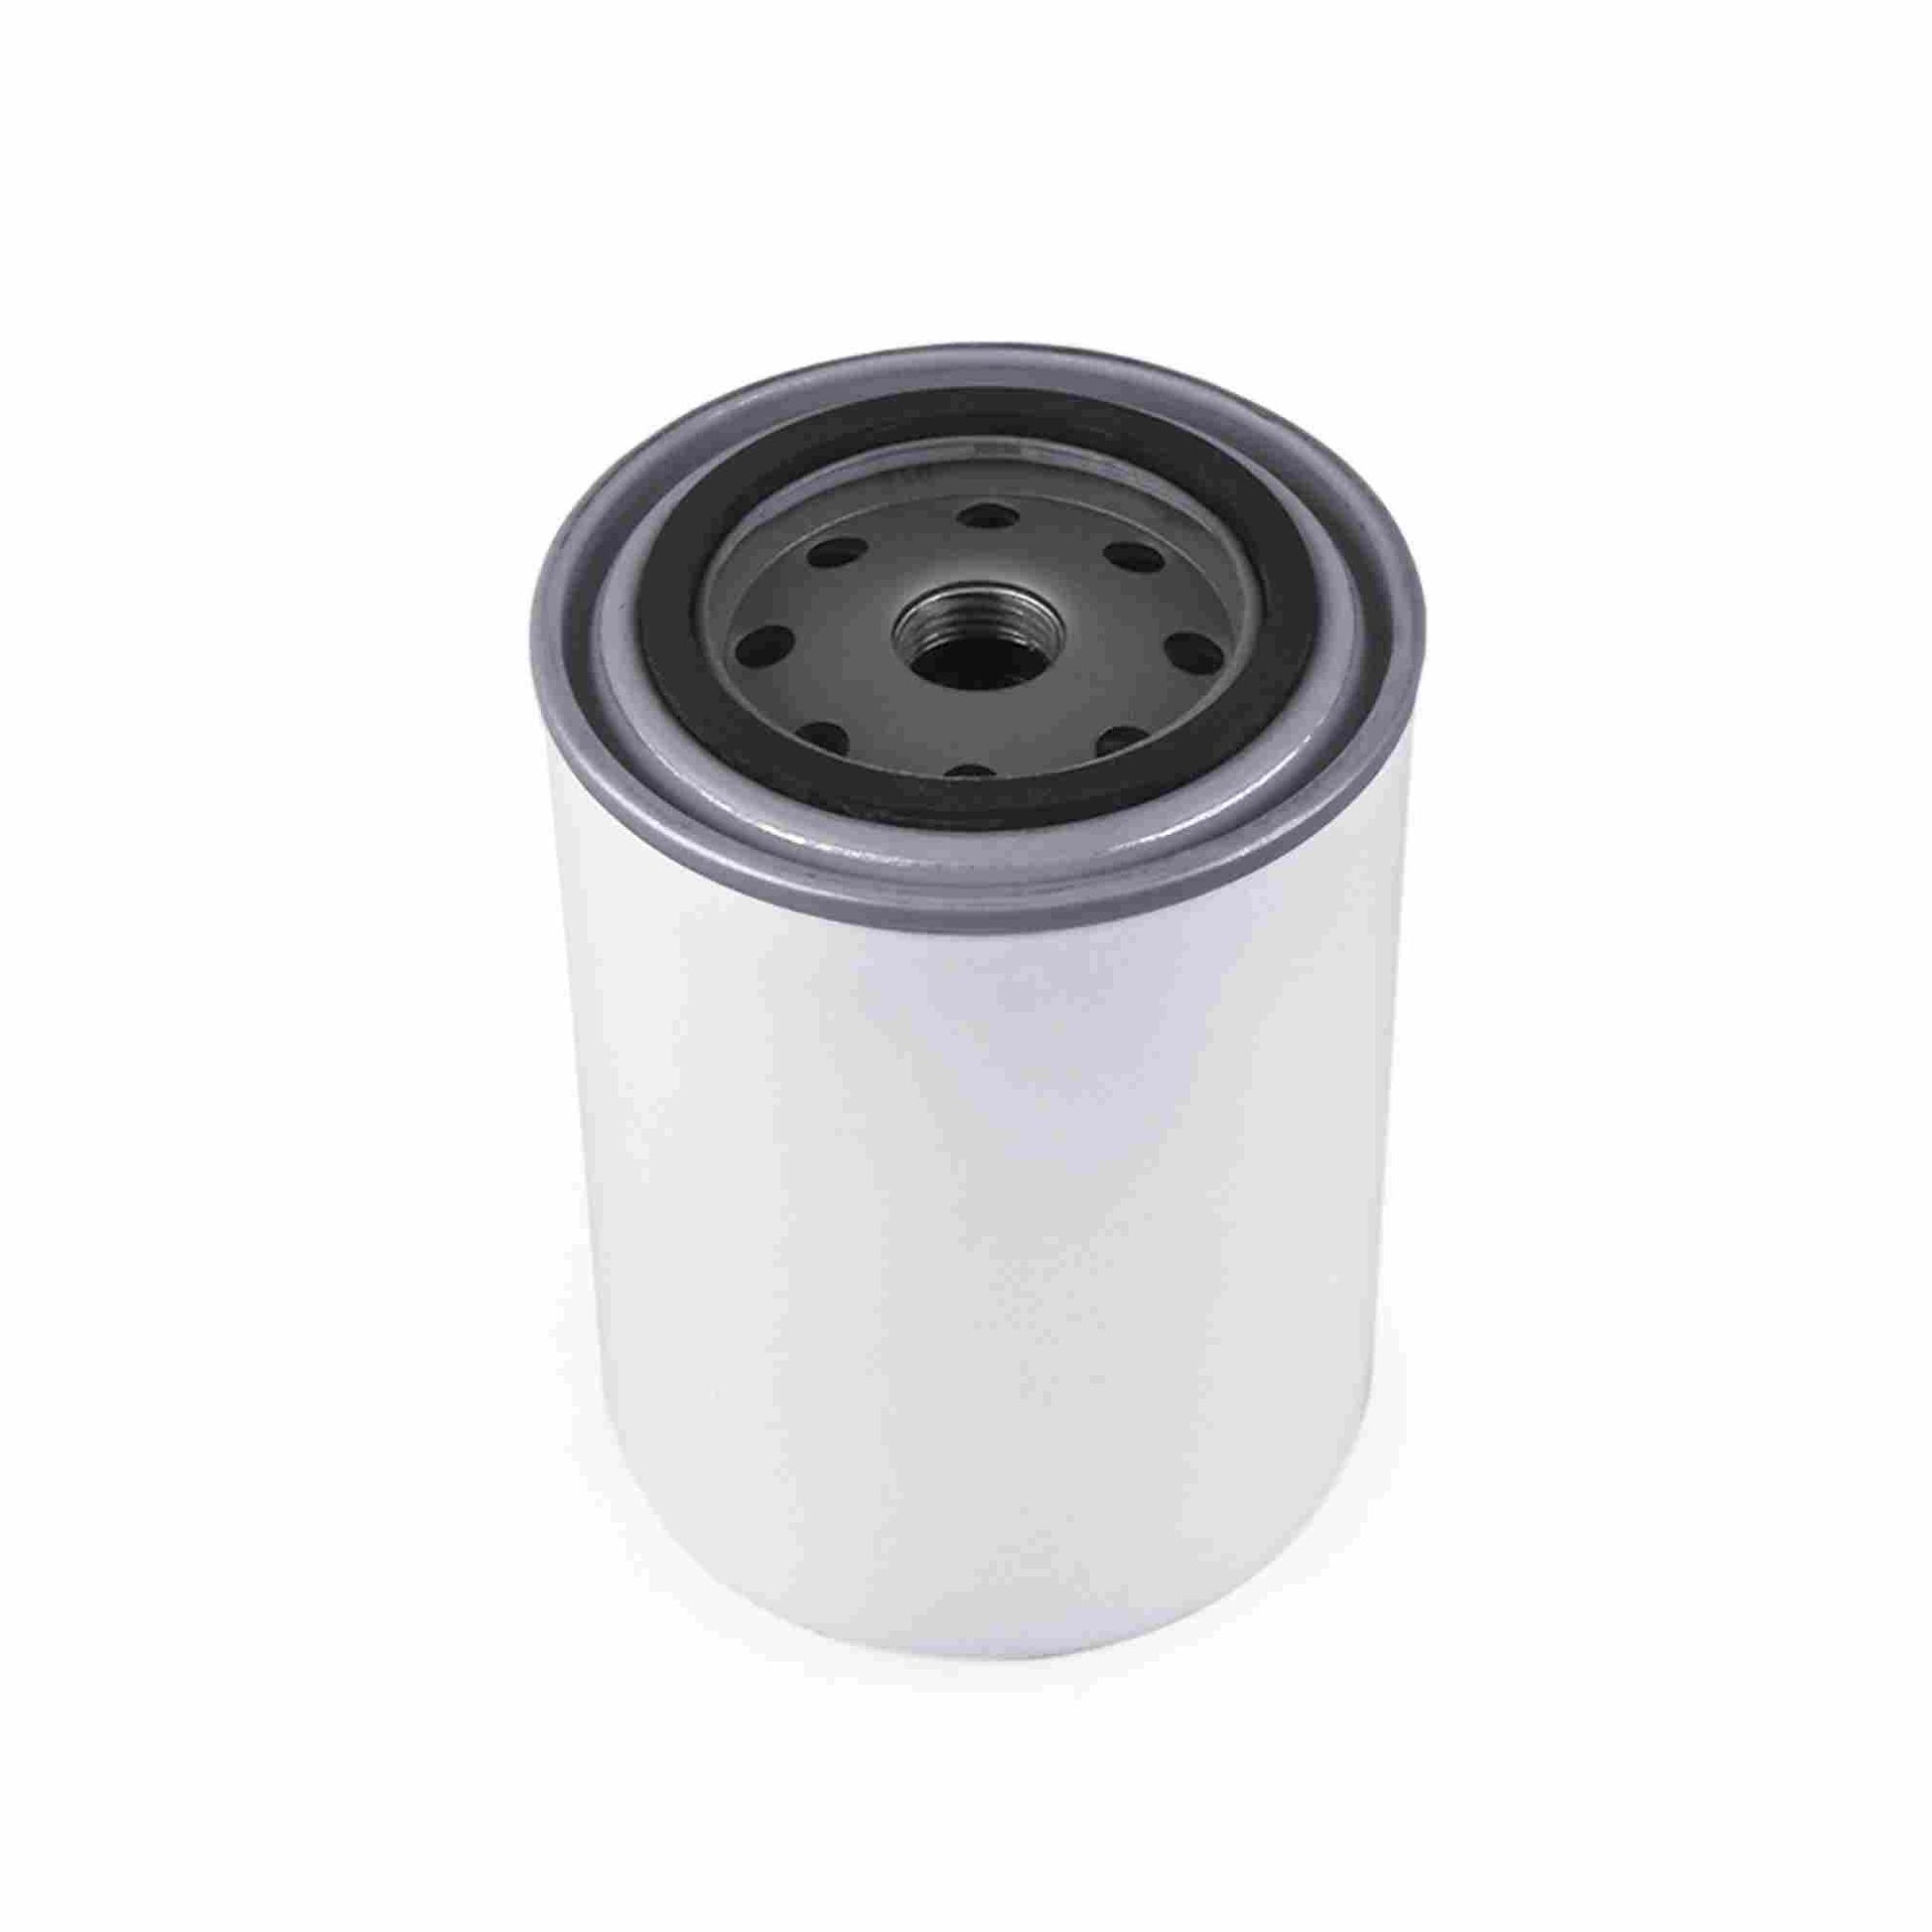 RASTP High Quality Oil Filter Fuel Filter for Ford Pickup and 6.0 OFTE Treated Sealing Gasked - RASTP